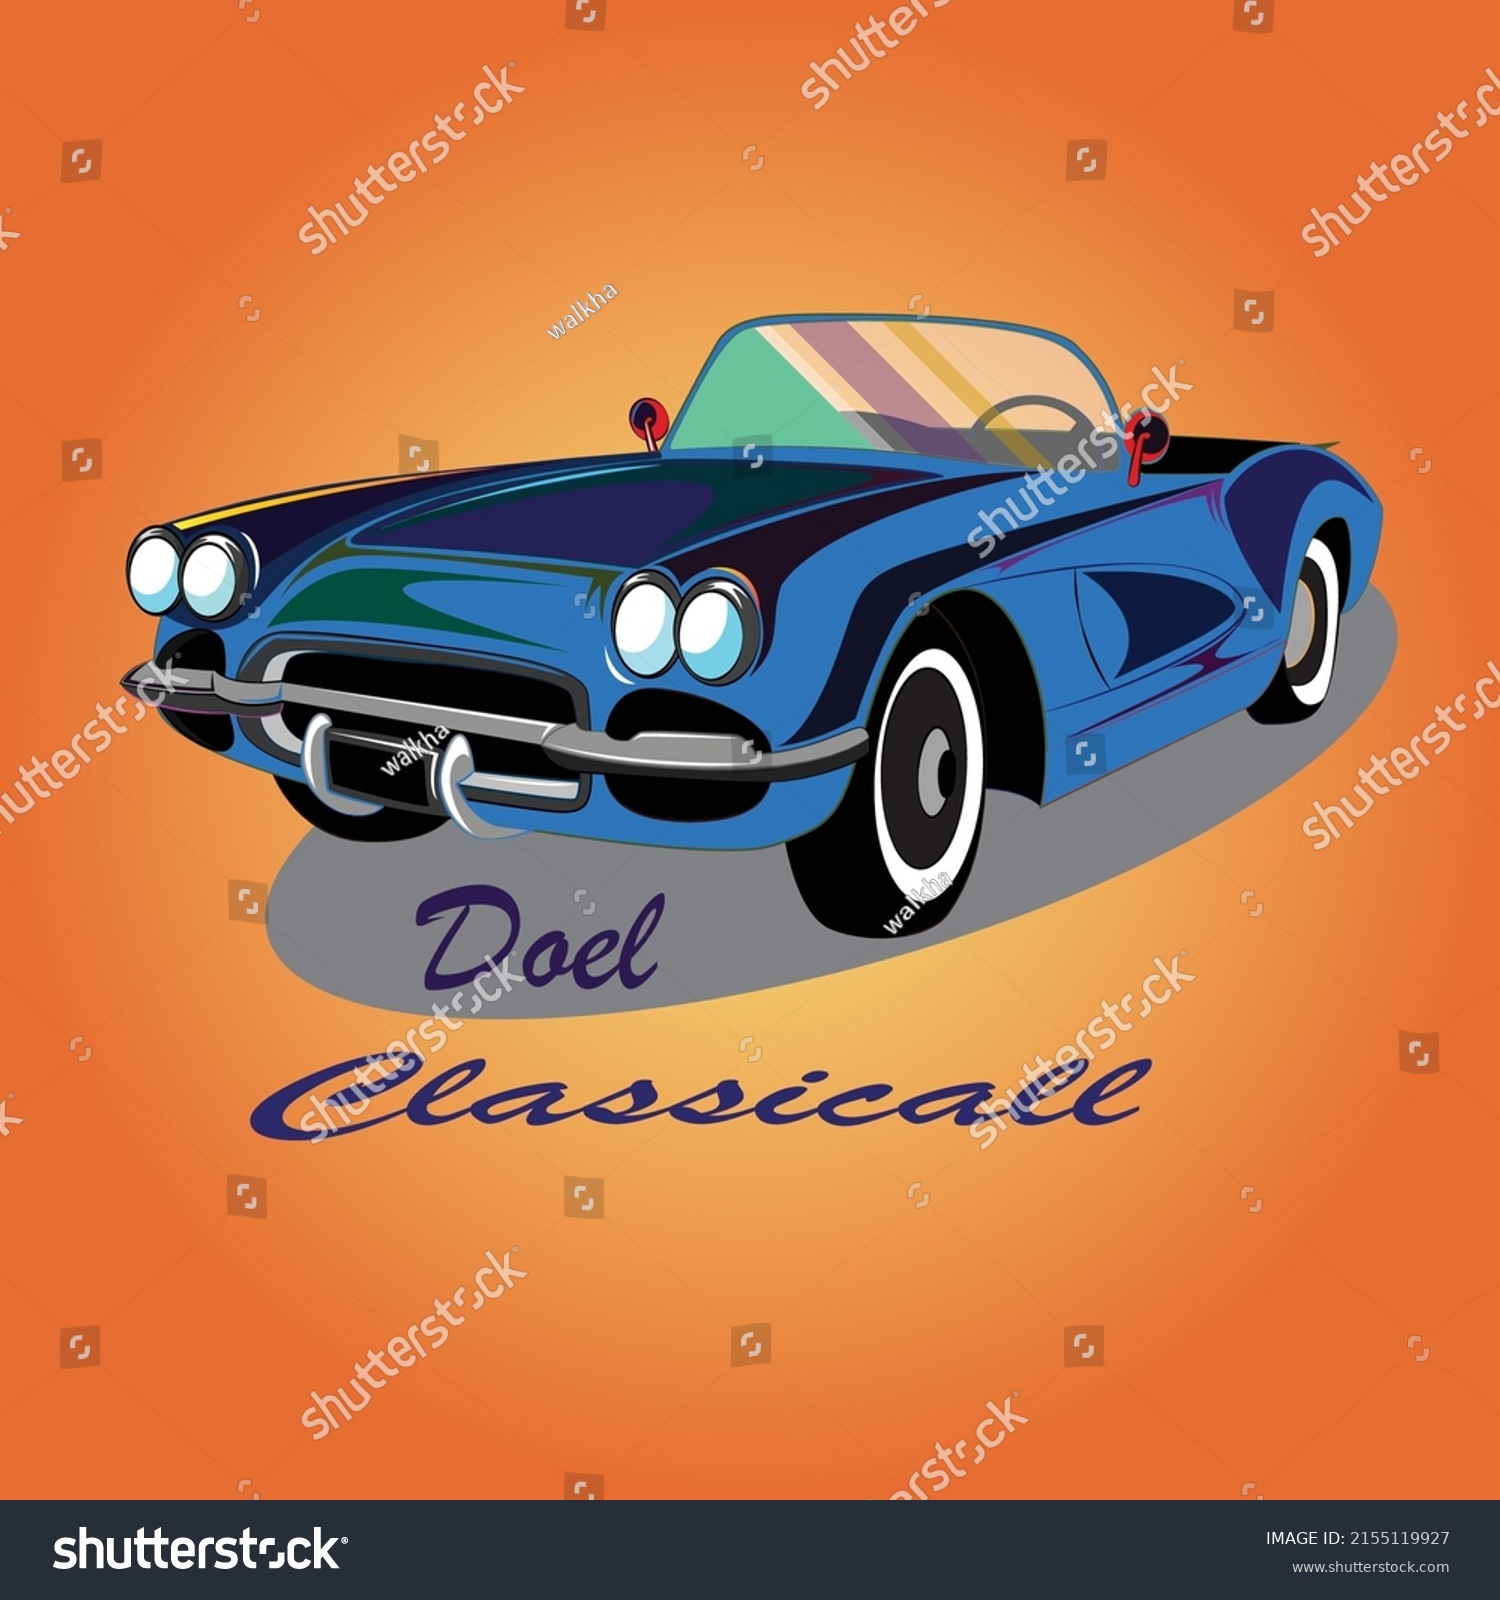 SVG of 3D rendering of a brand-less generic concept car in studio environment svg